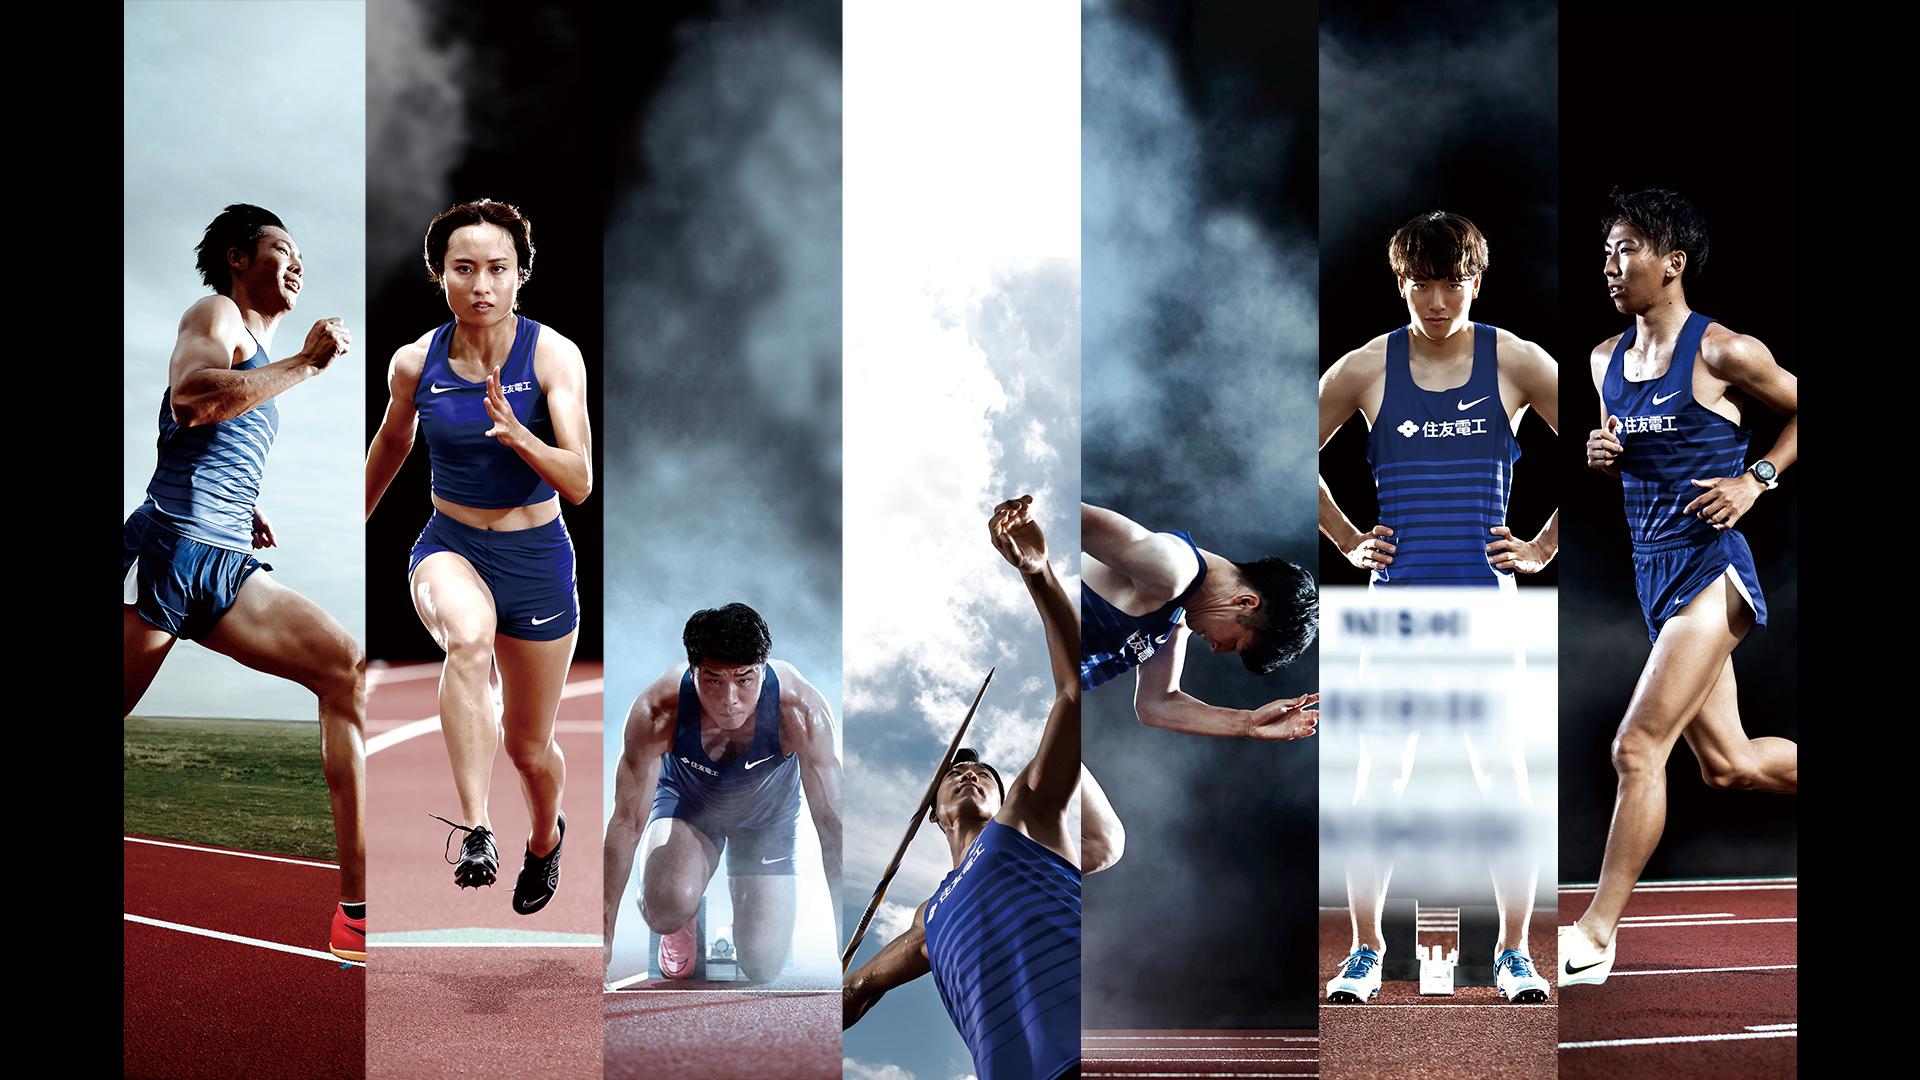 Aiming Higher, Our Challenge Will Never End～Sumitomo Electric’s Track and Field Team～